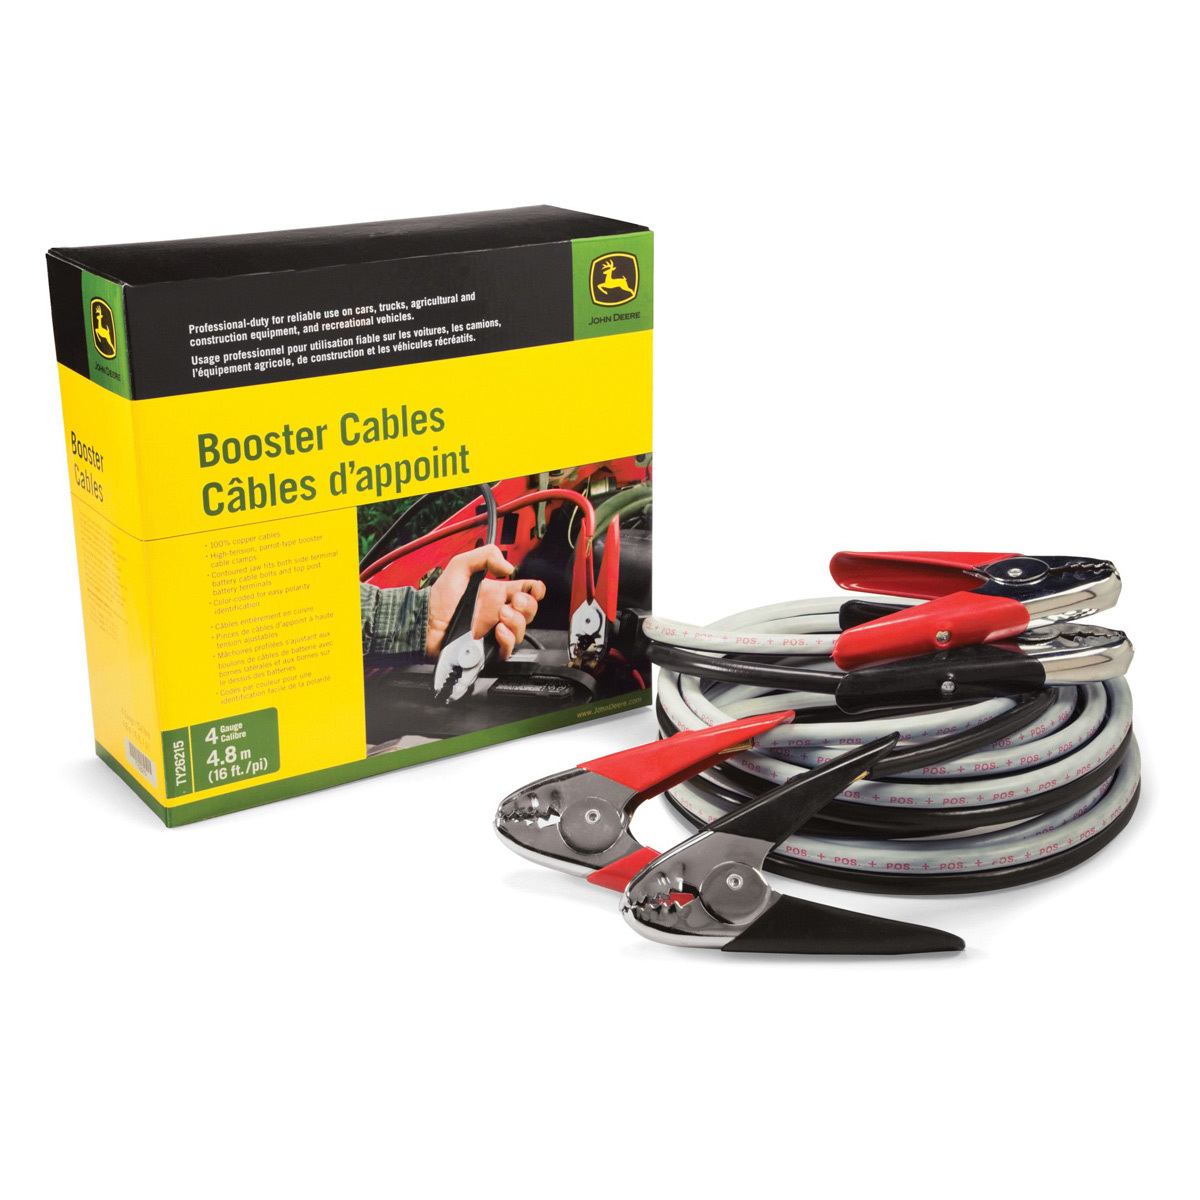 16' Booster Cables